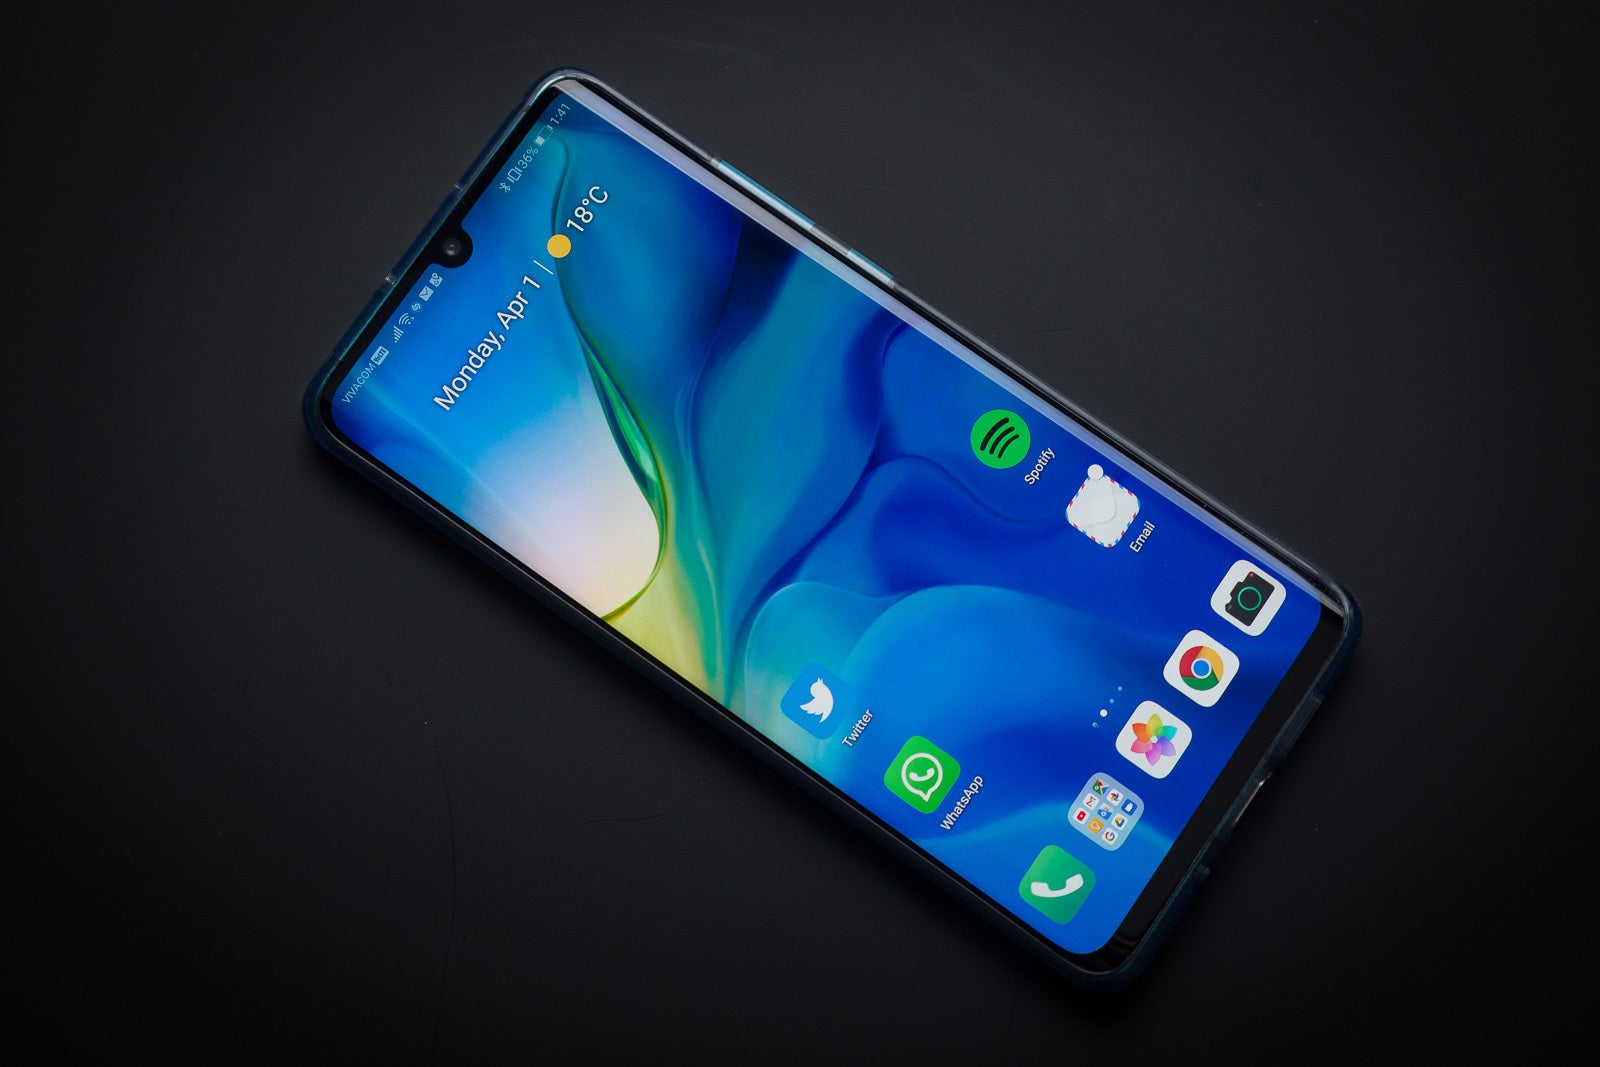 The Huawei P30 Pro running Android 9 Pie - Huawei P40 Series to be announced in March with several upgrades, Android 10: CEO